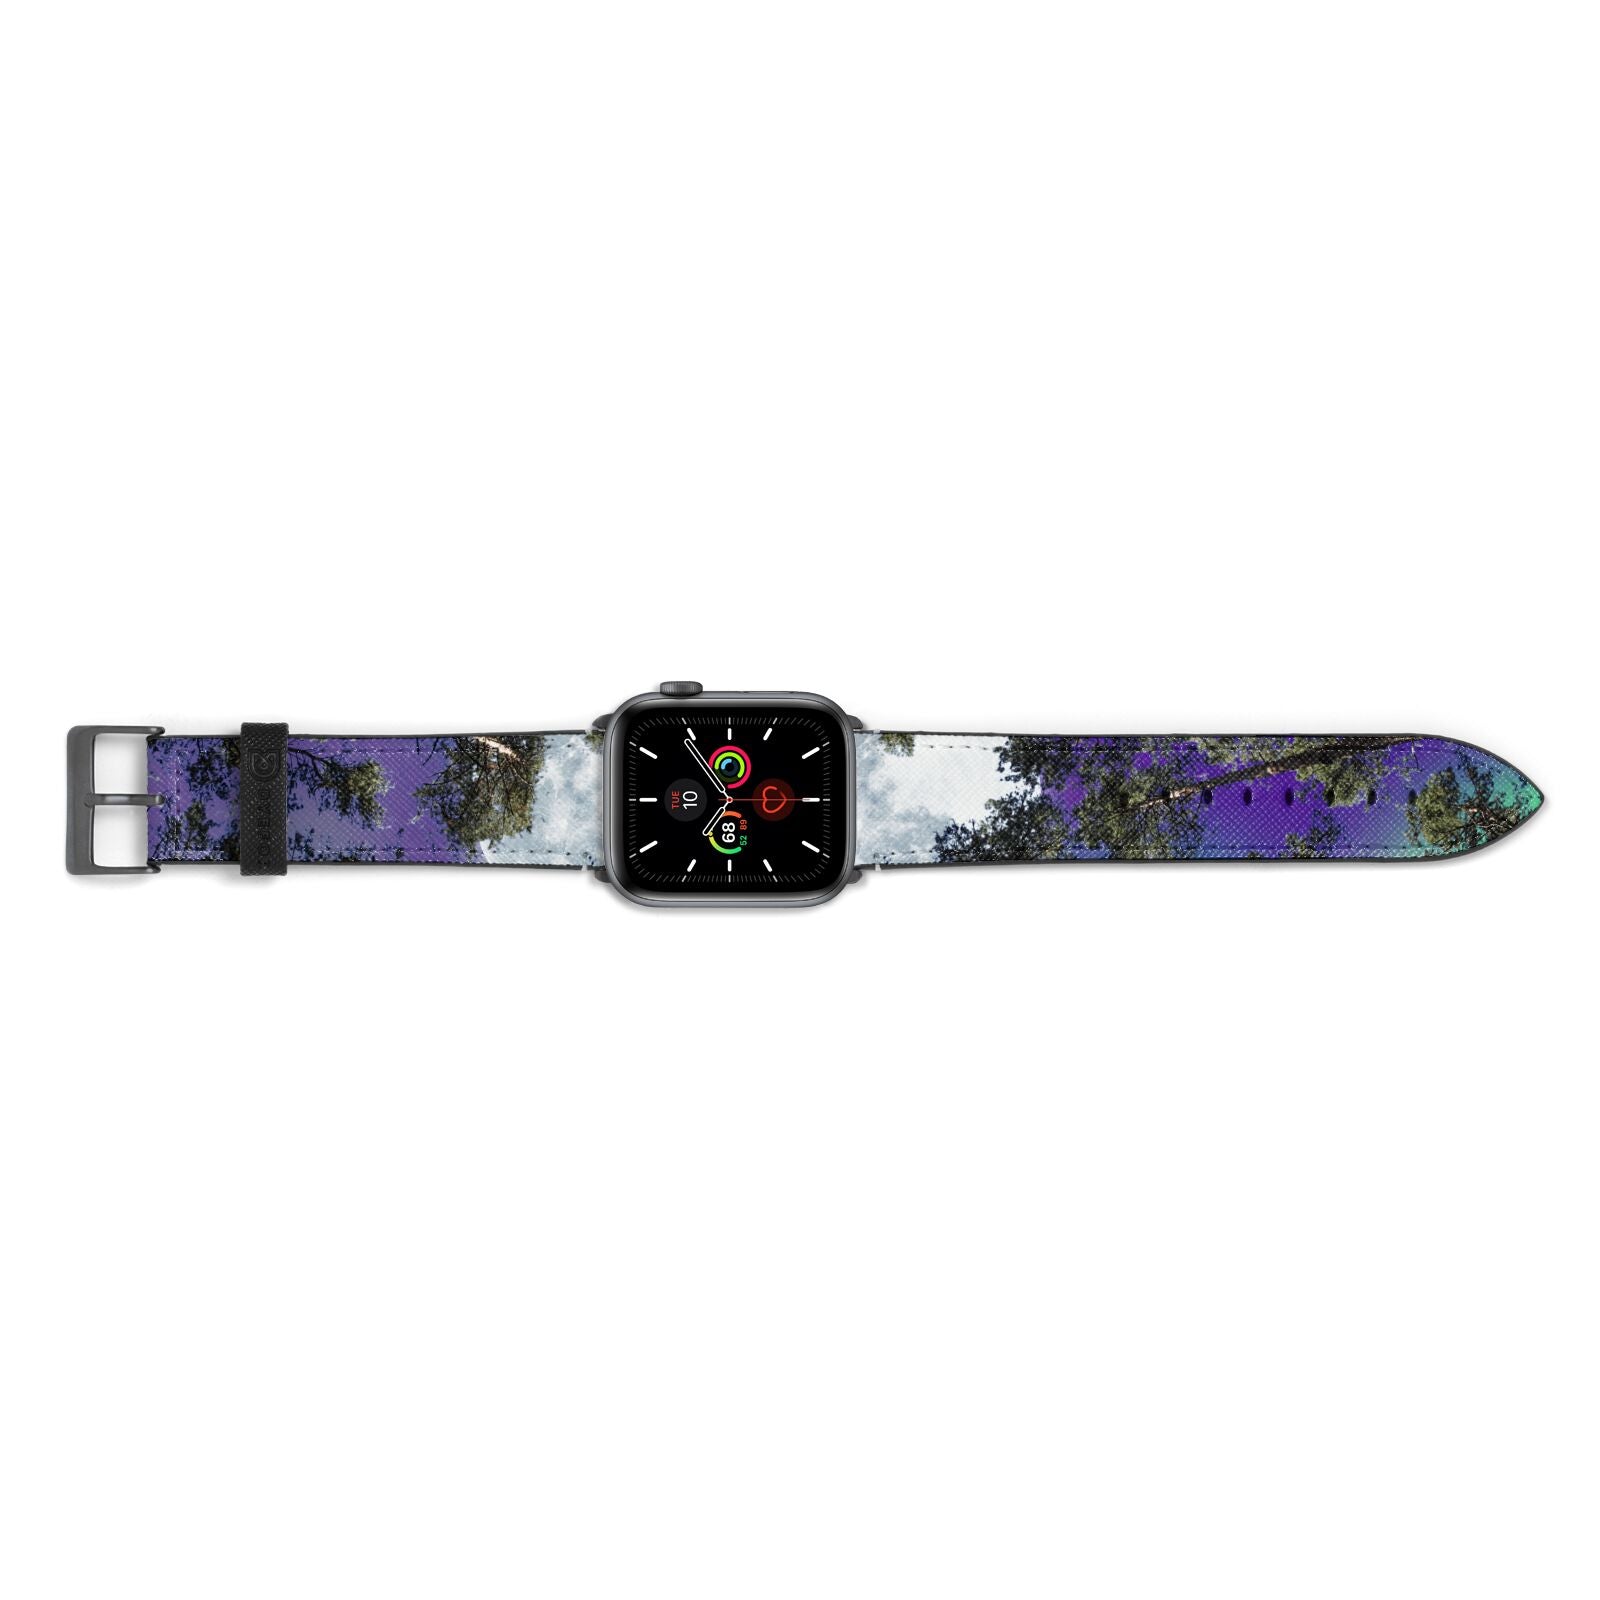 Forest Moon Apple Watch Strap Landscape Image Space Grey Hardware